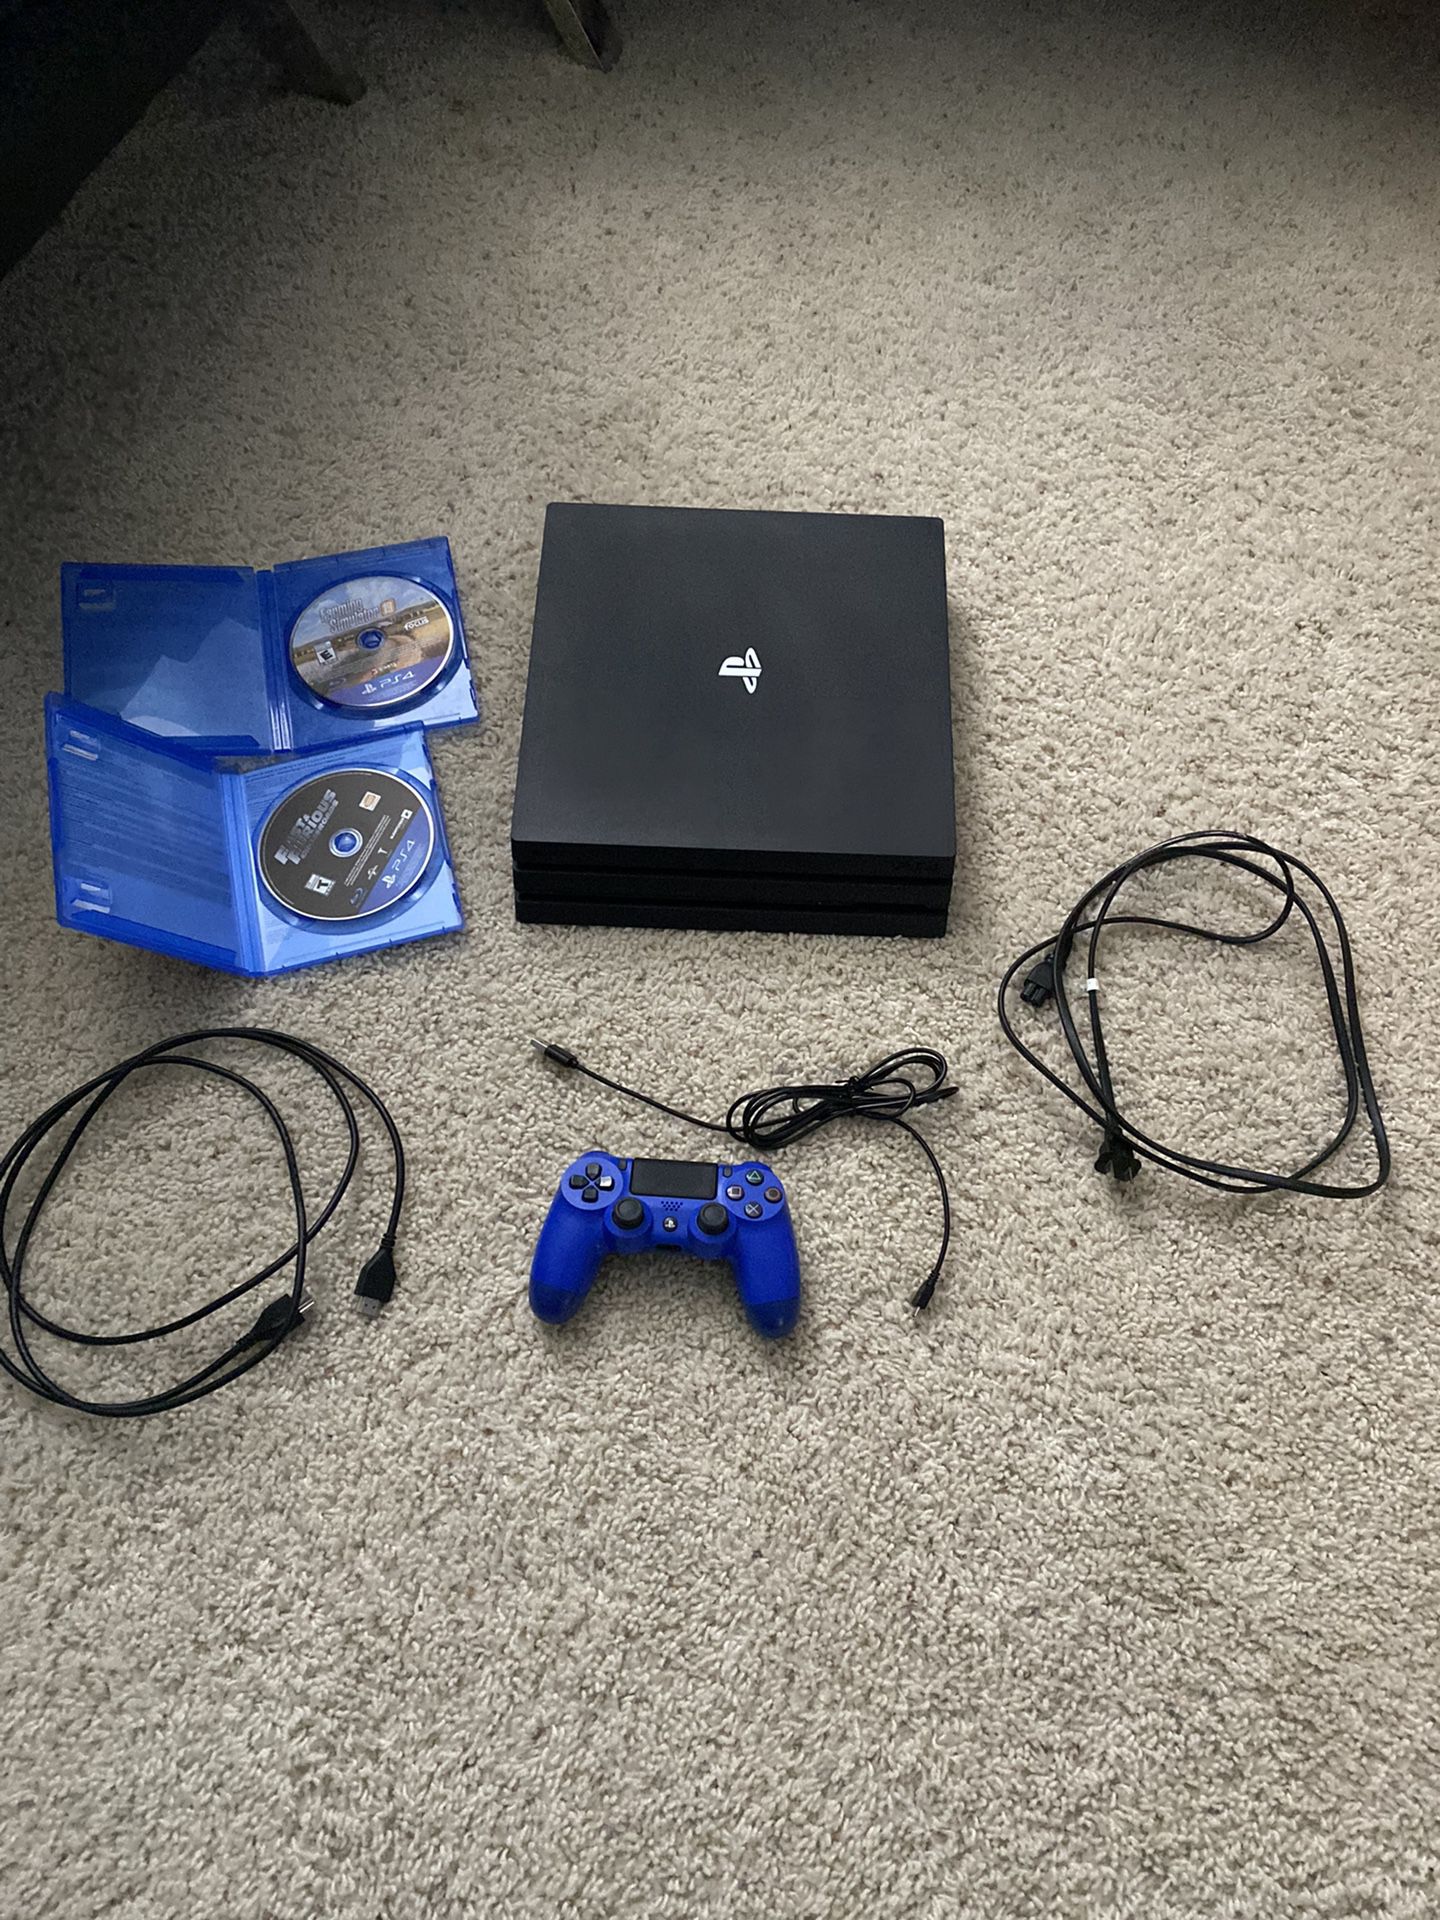 Ps4 Pro 1tb for Sale in San Ramon, CA - OfferUp